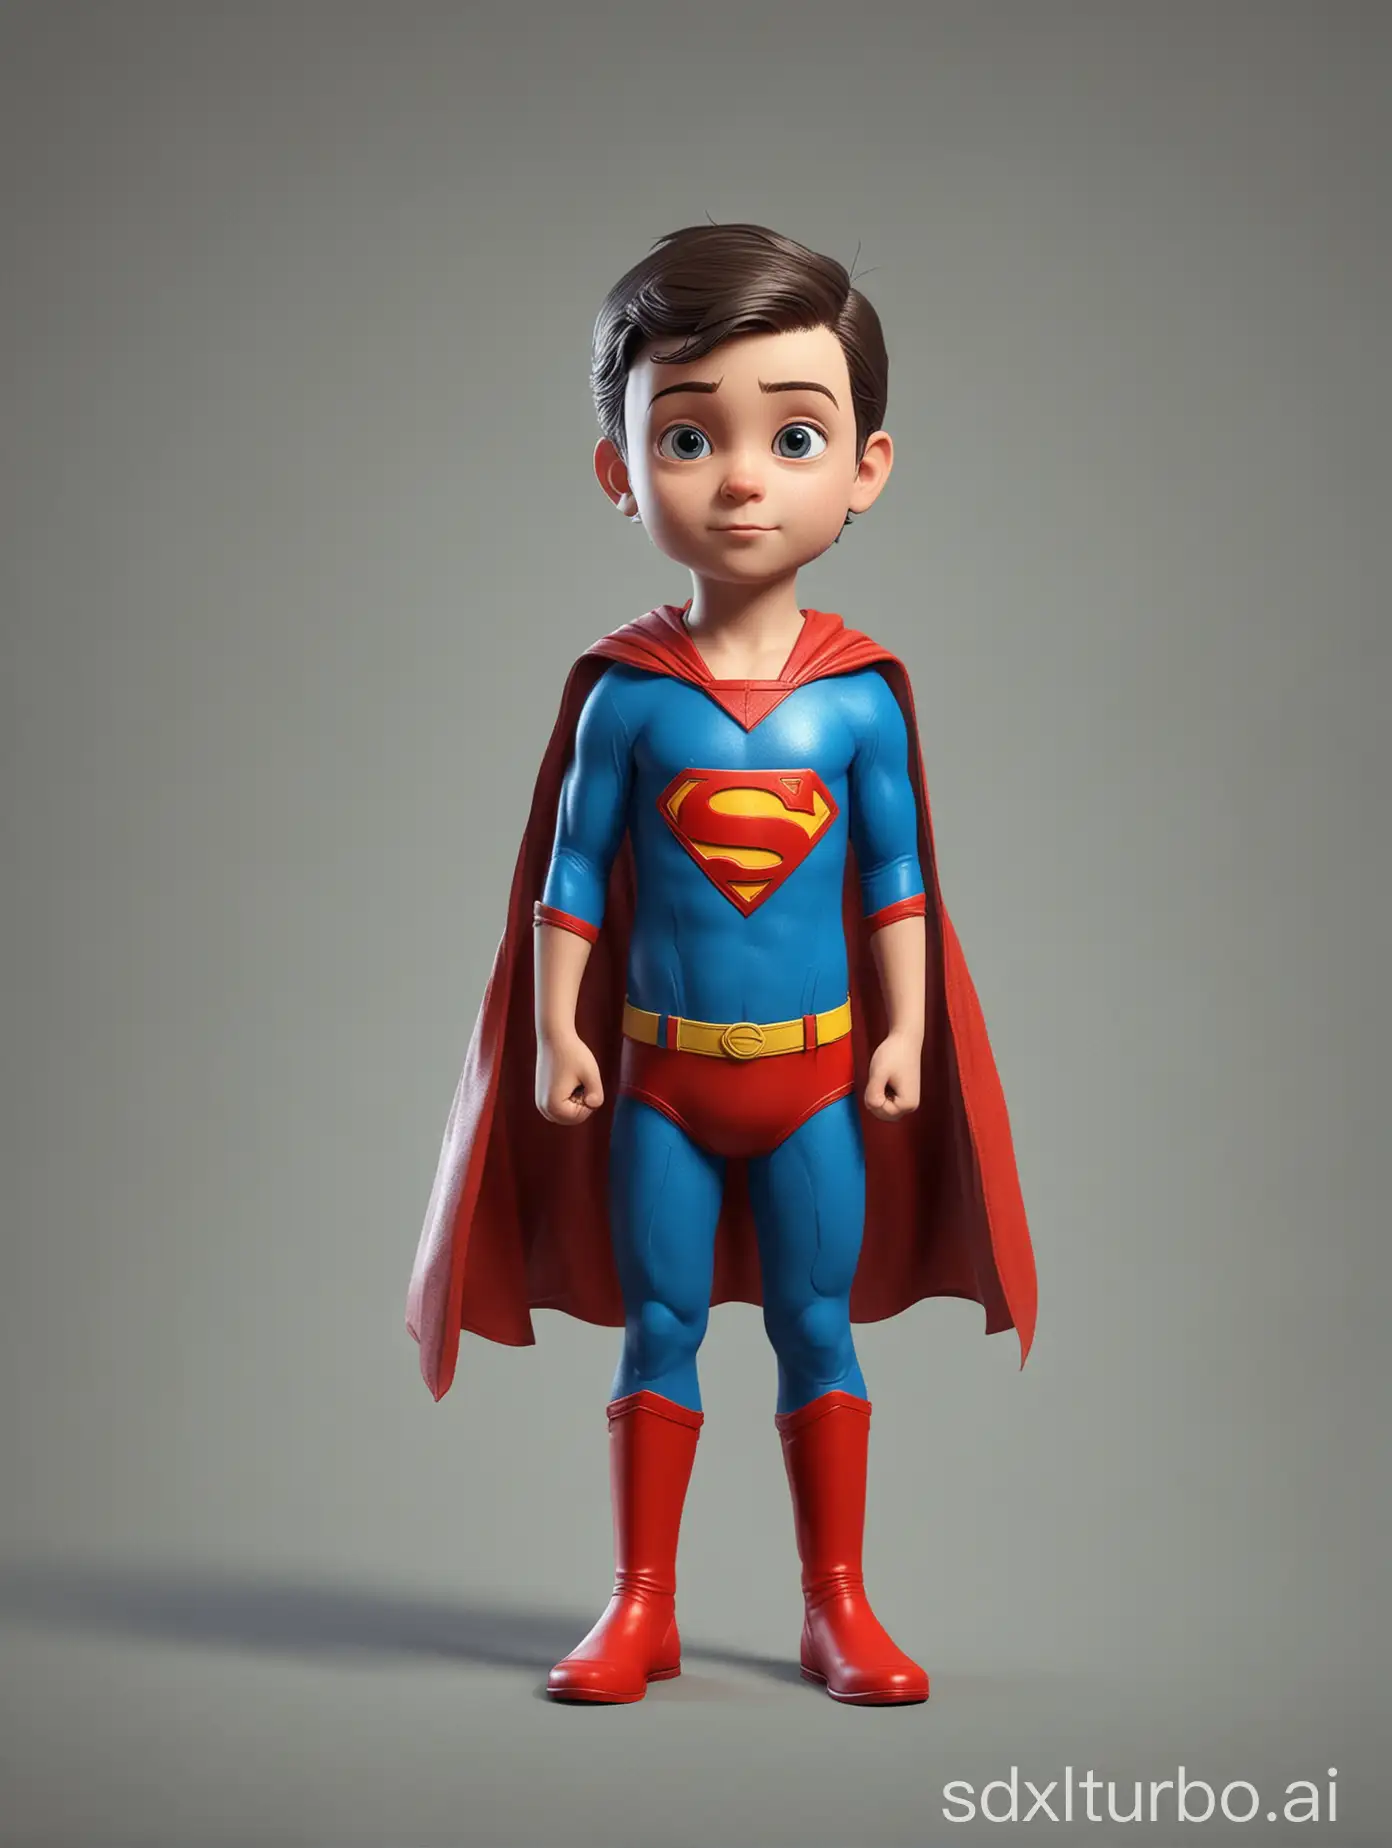 Little child Superman, game character, stands at full height